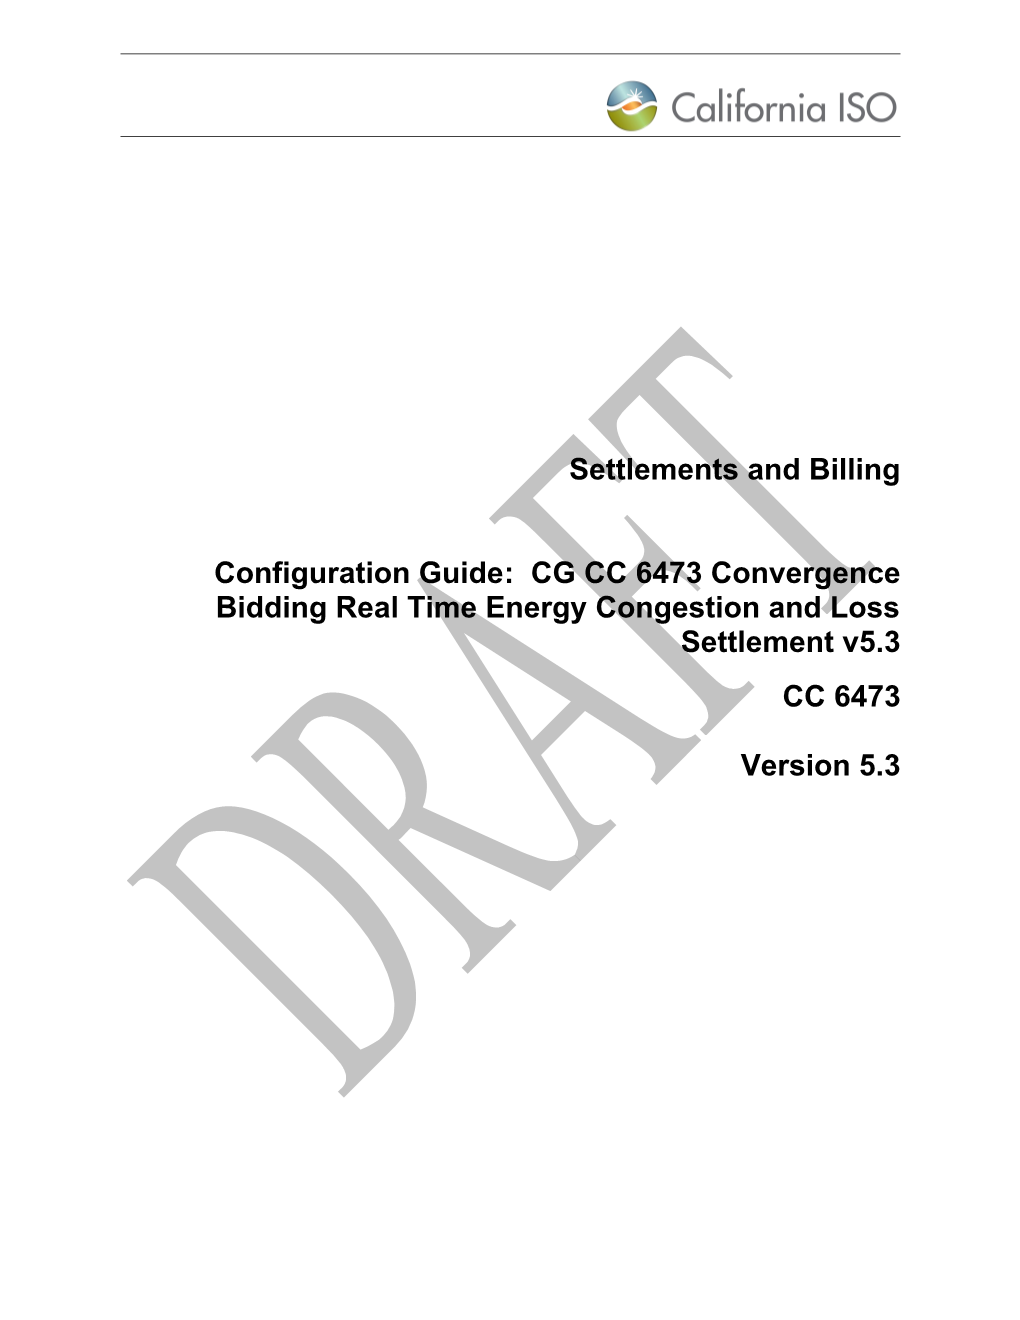 CG CC 6473 Convergence Bidding Real Time Energy Congestion and Loss Settlement V5.3